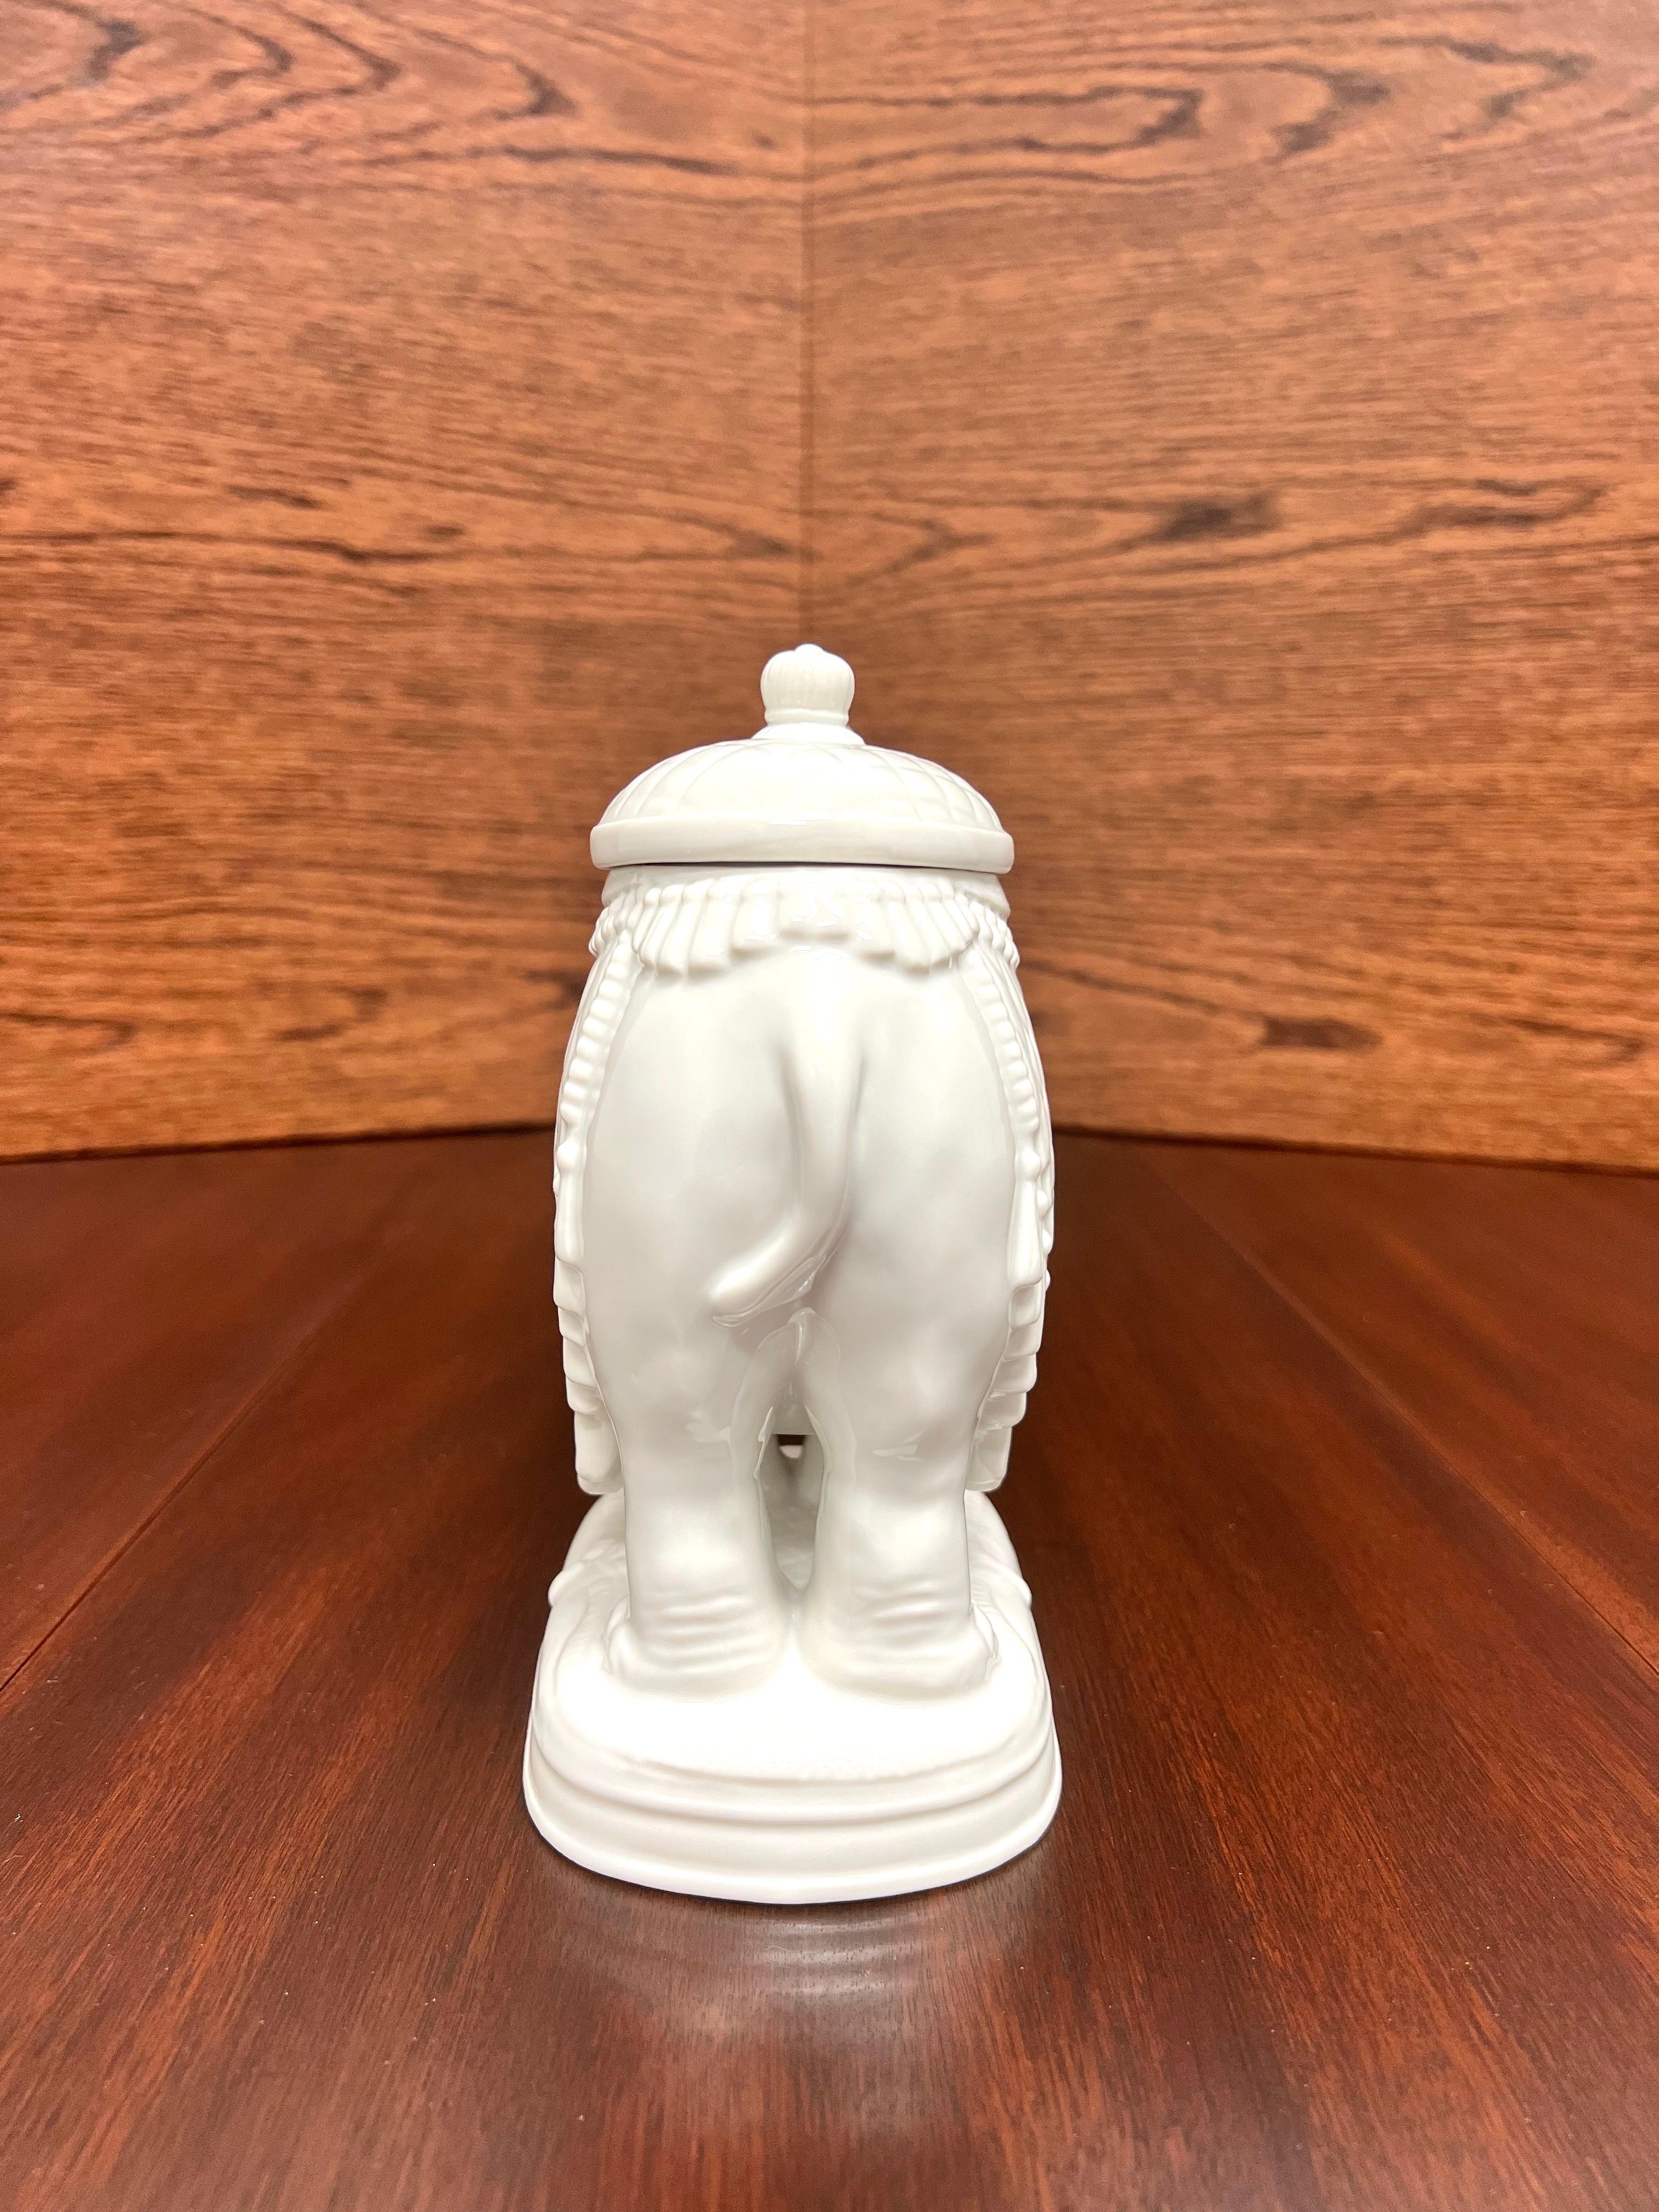 Anglo-Indian ANDREA BY SADEK White Porcelain Elephant Candy Dish For Sale